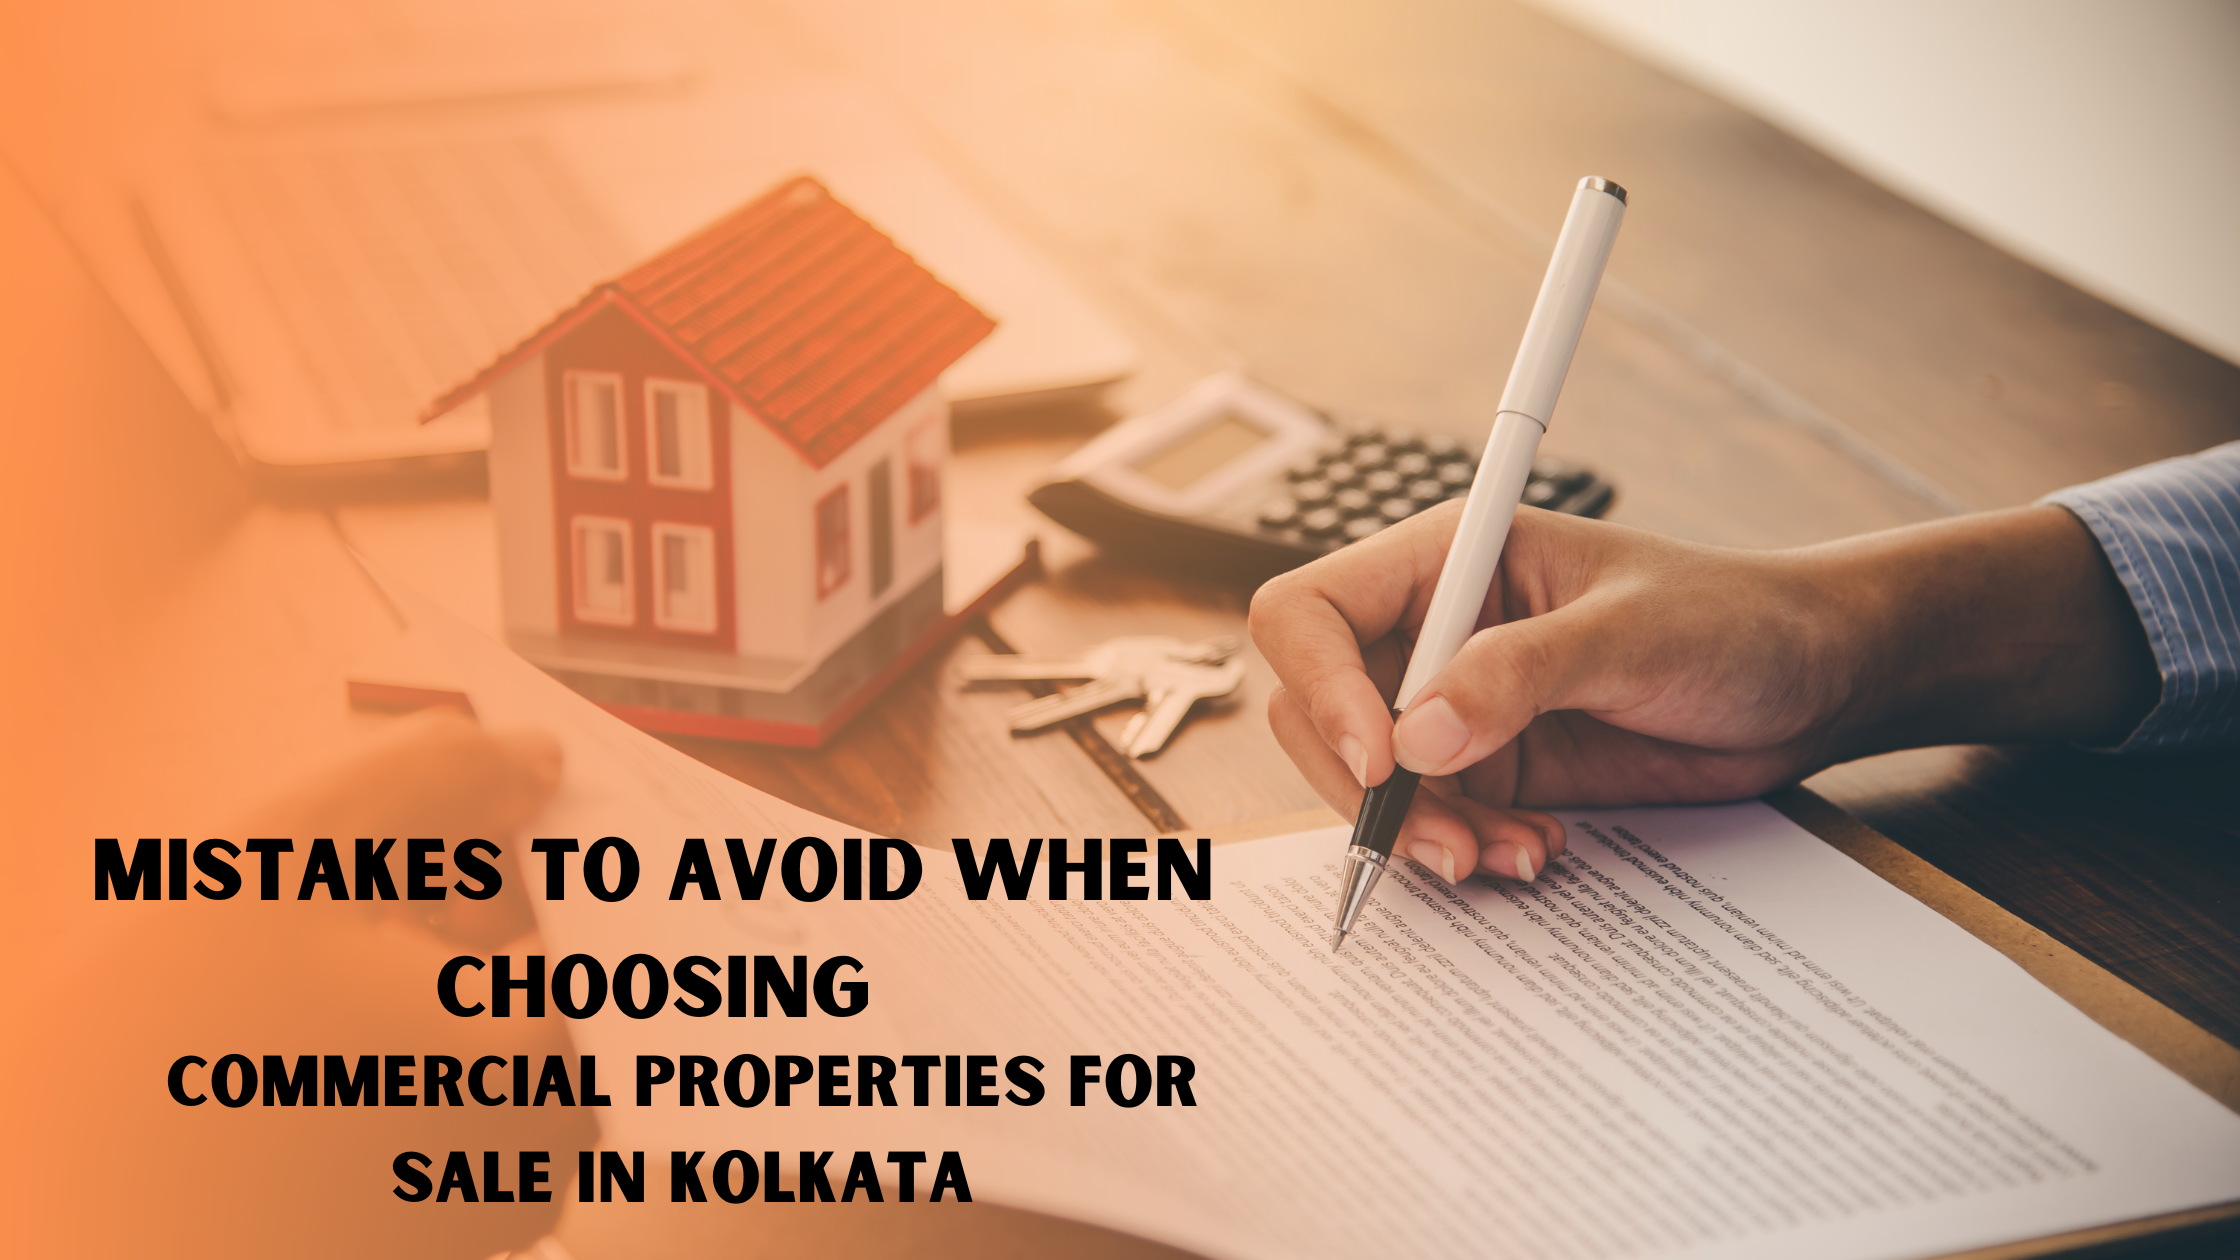 Mistakes to Avoid When Choosing Commercial Properties for Sale in Kolkata